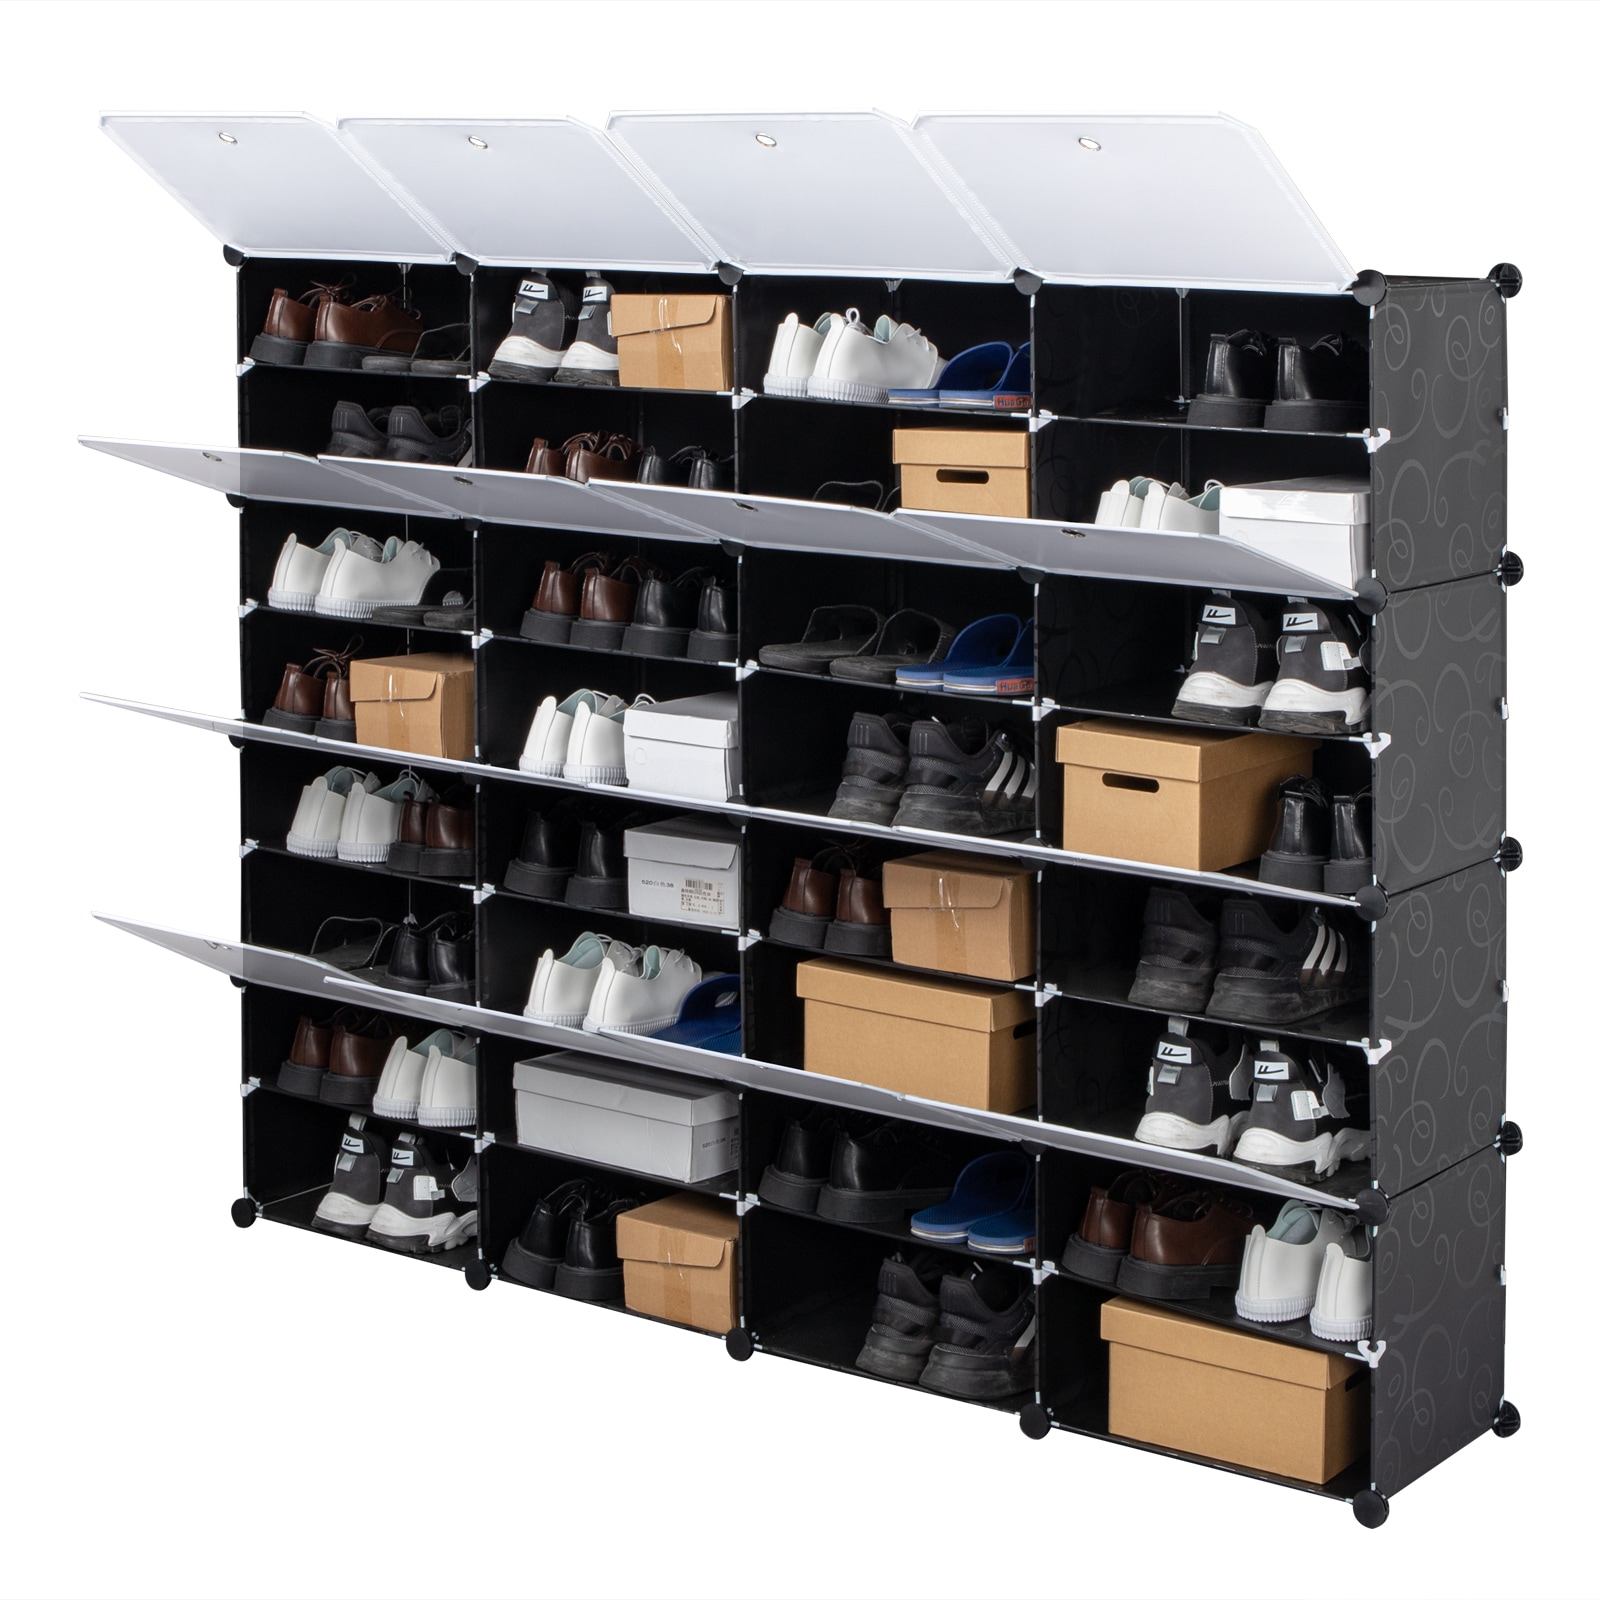 8-Pairs Wall-Mounted Shoe Organizer and Accessories